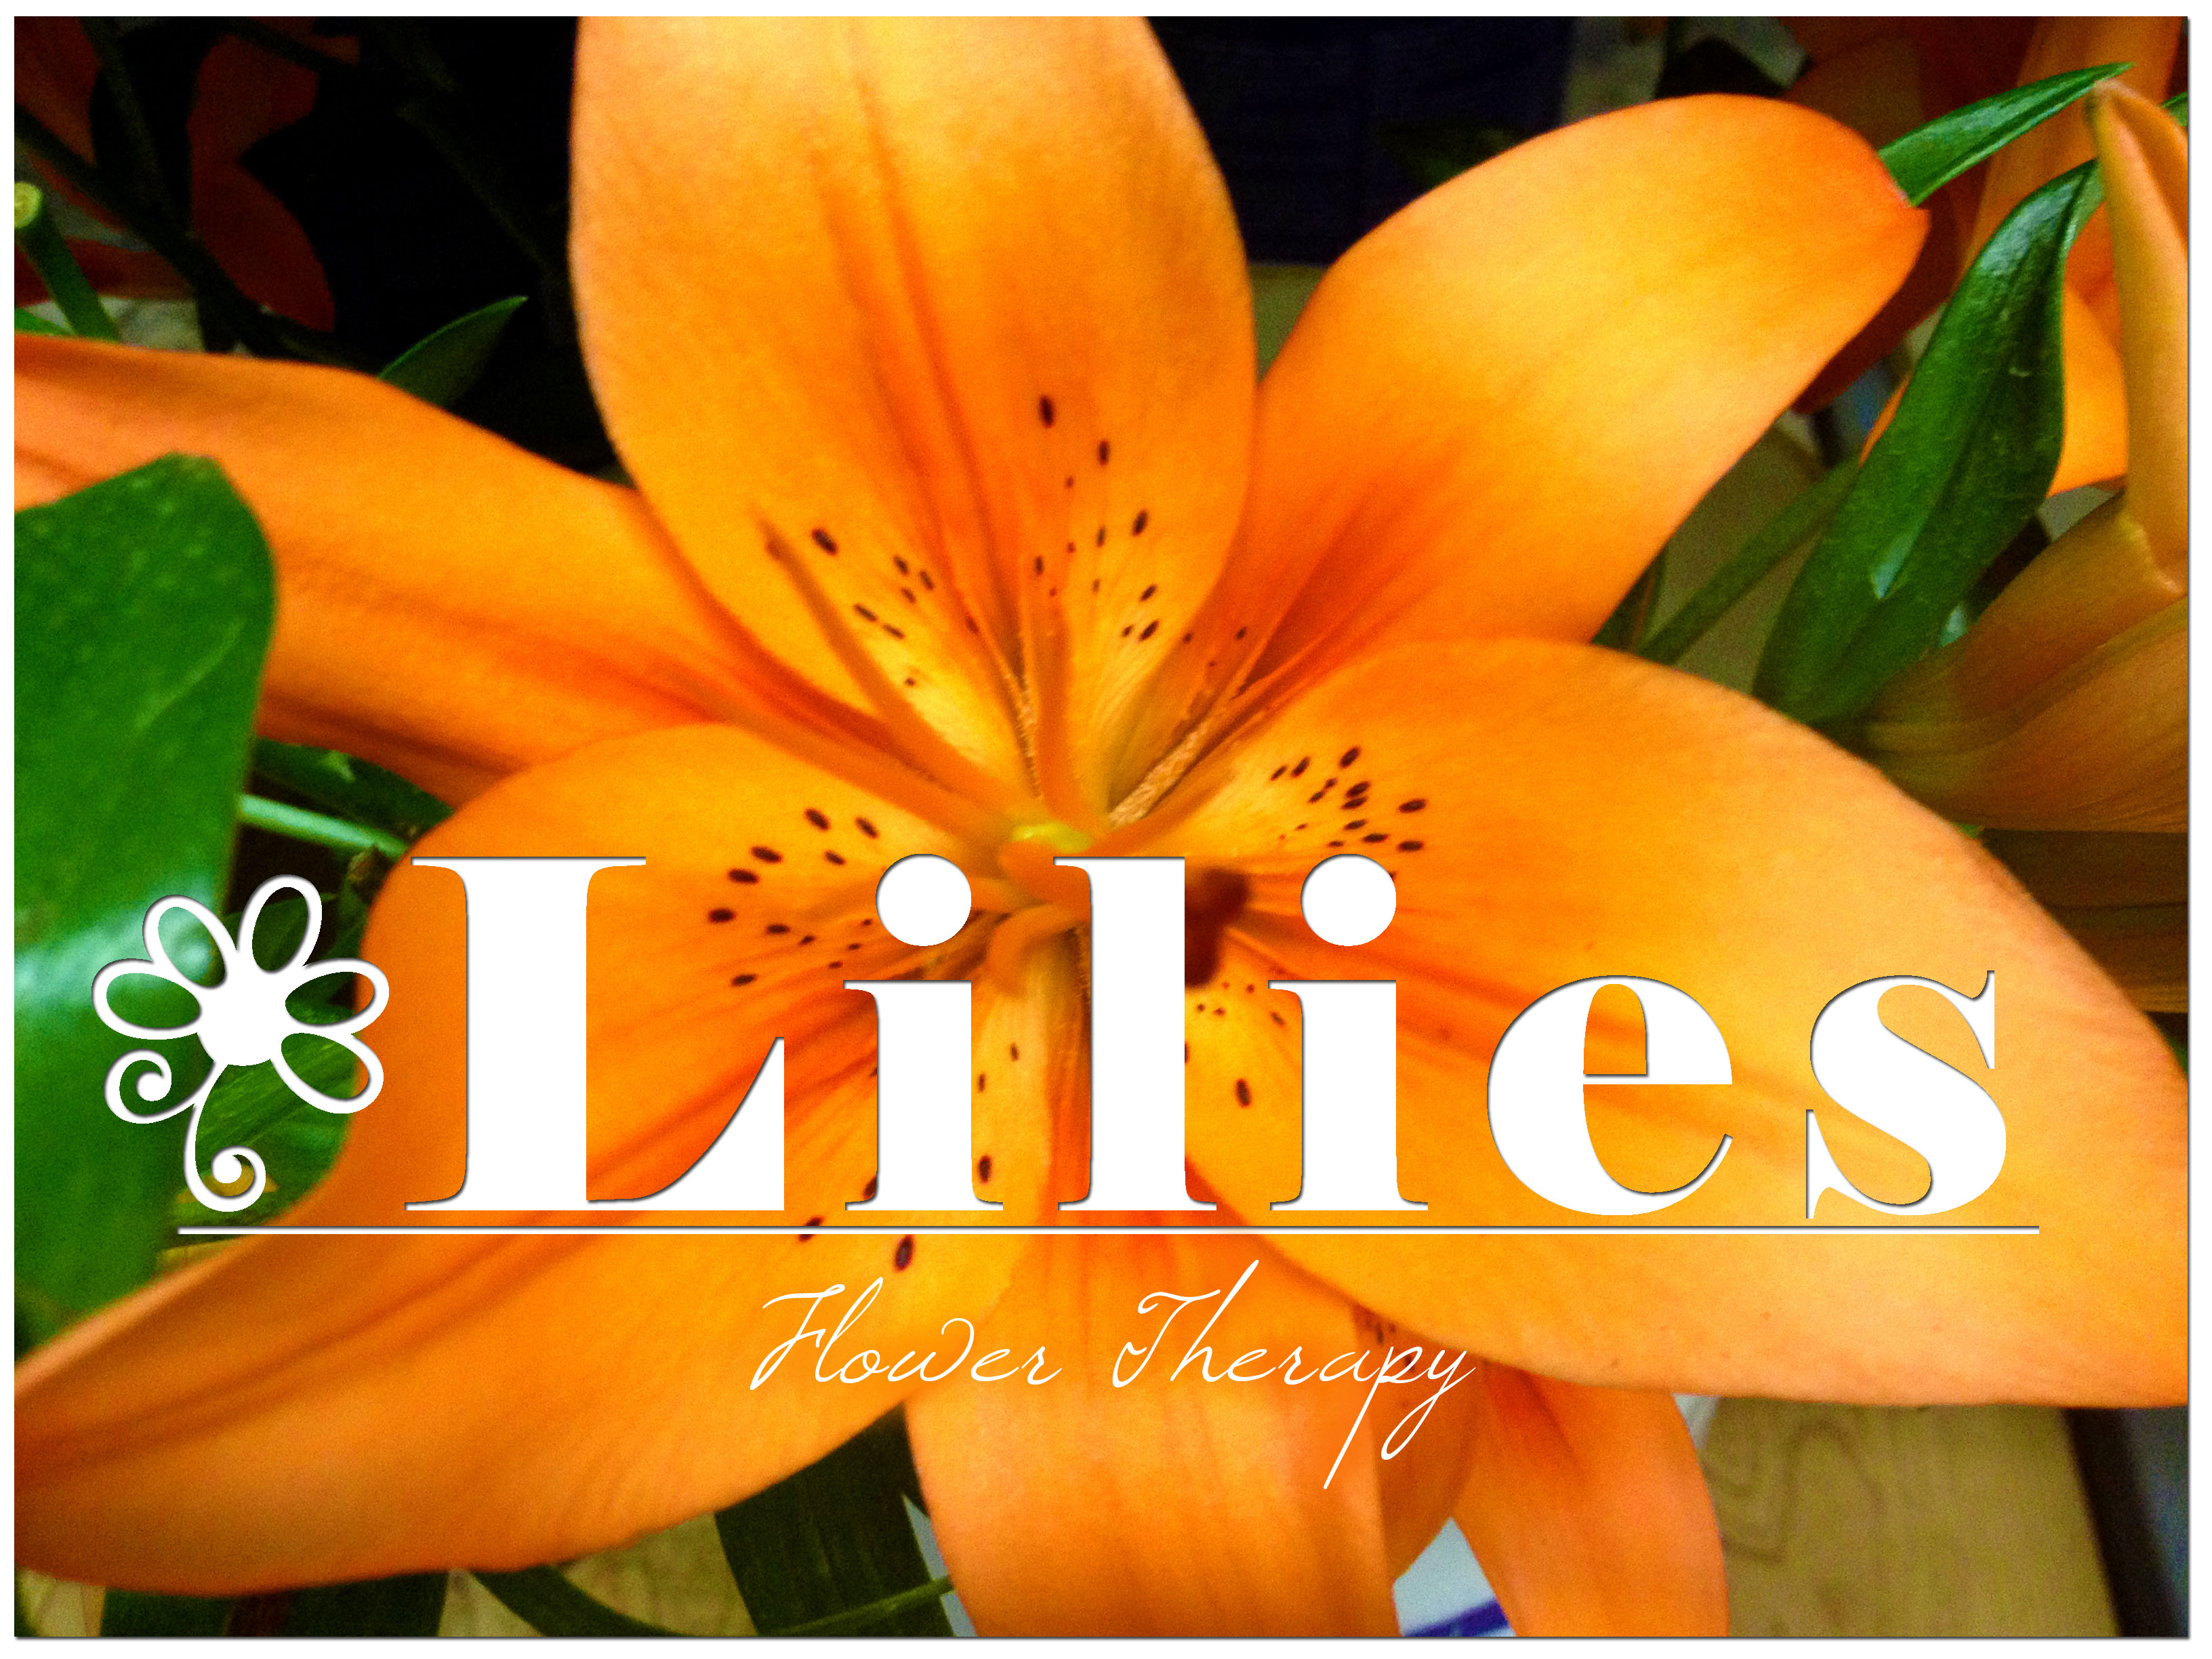 Freytags florist-lilies-flower-therapy